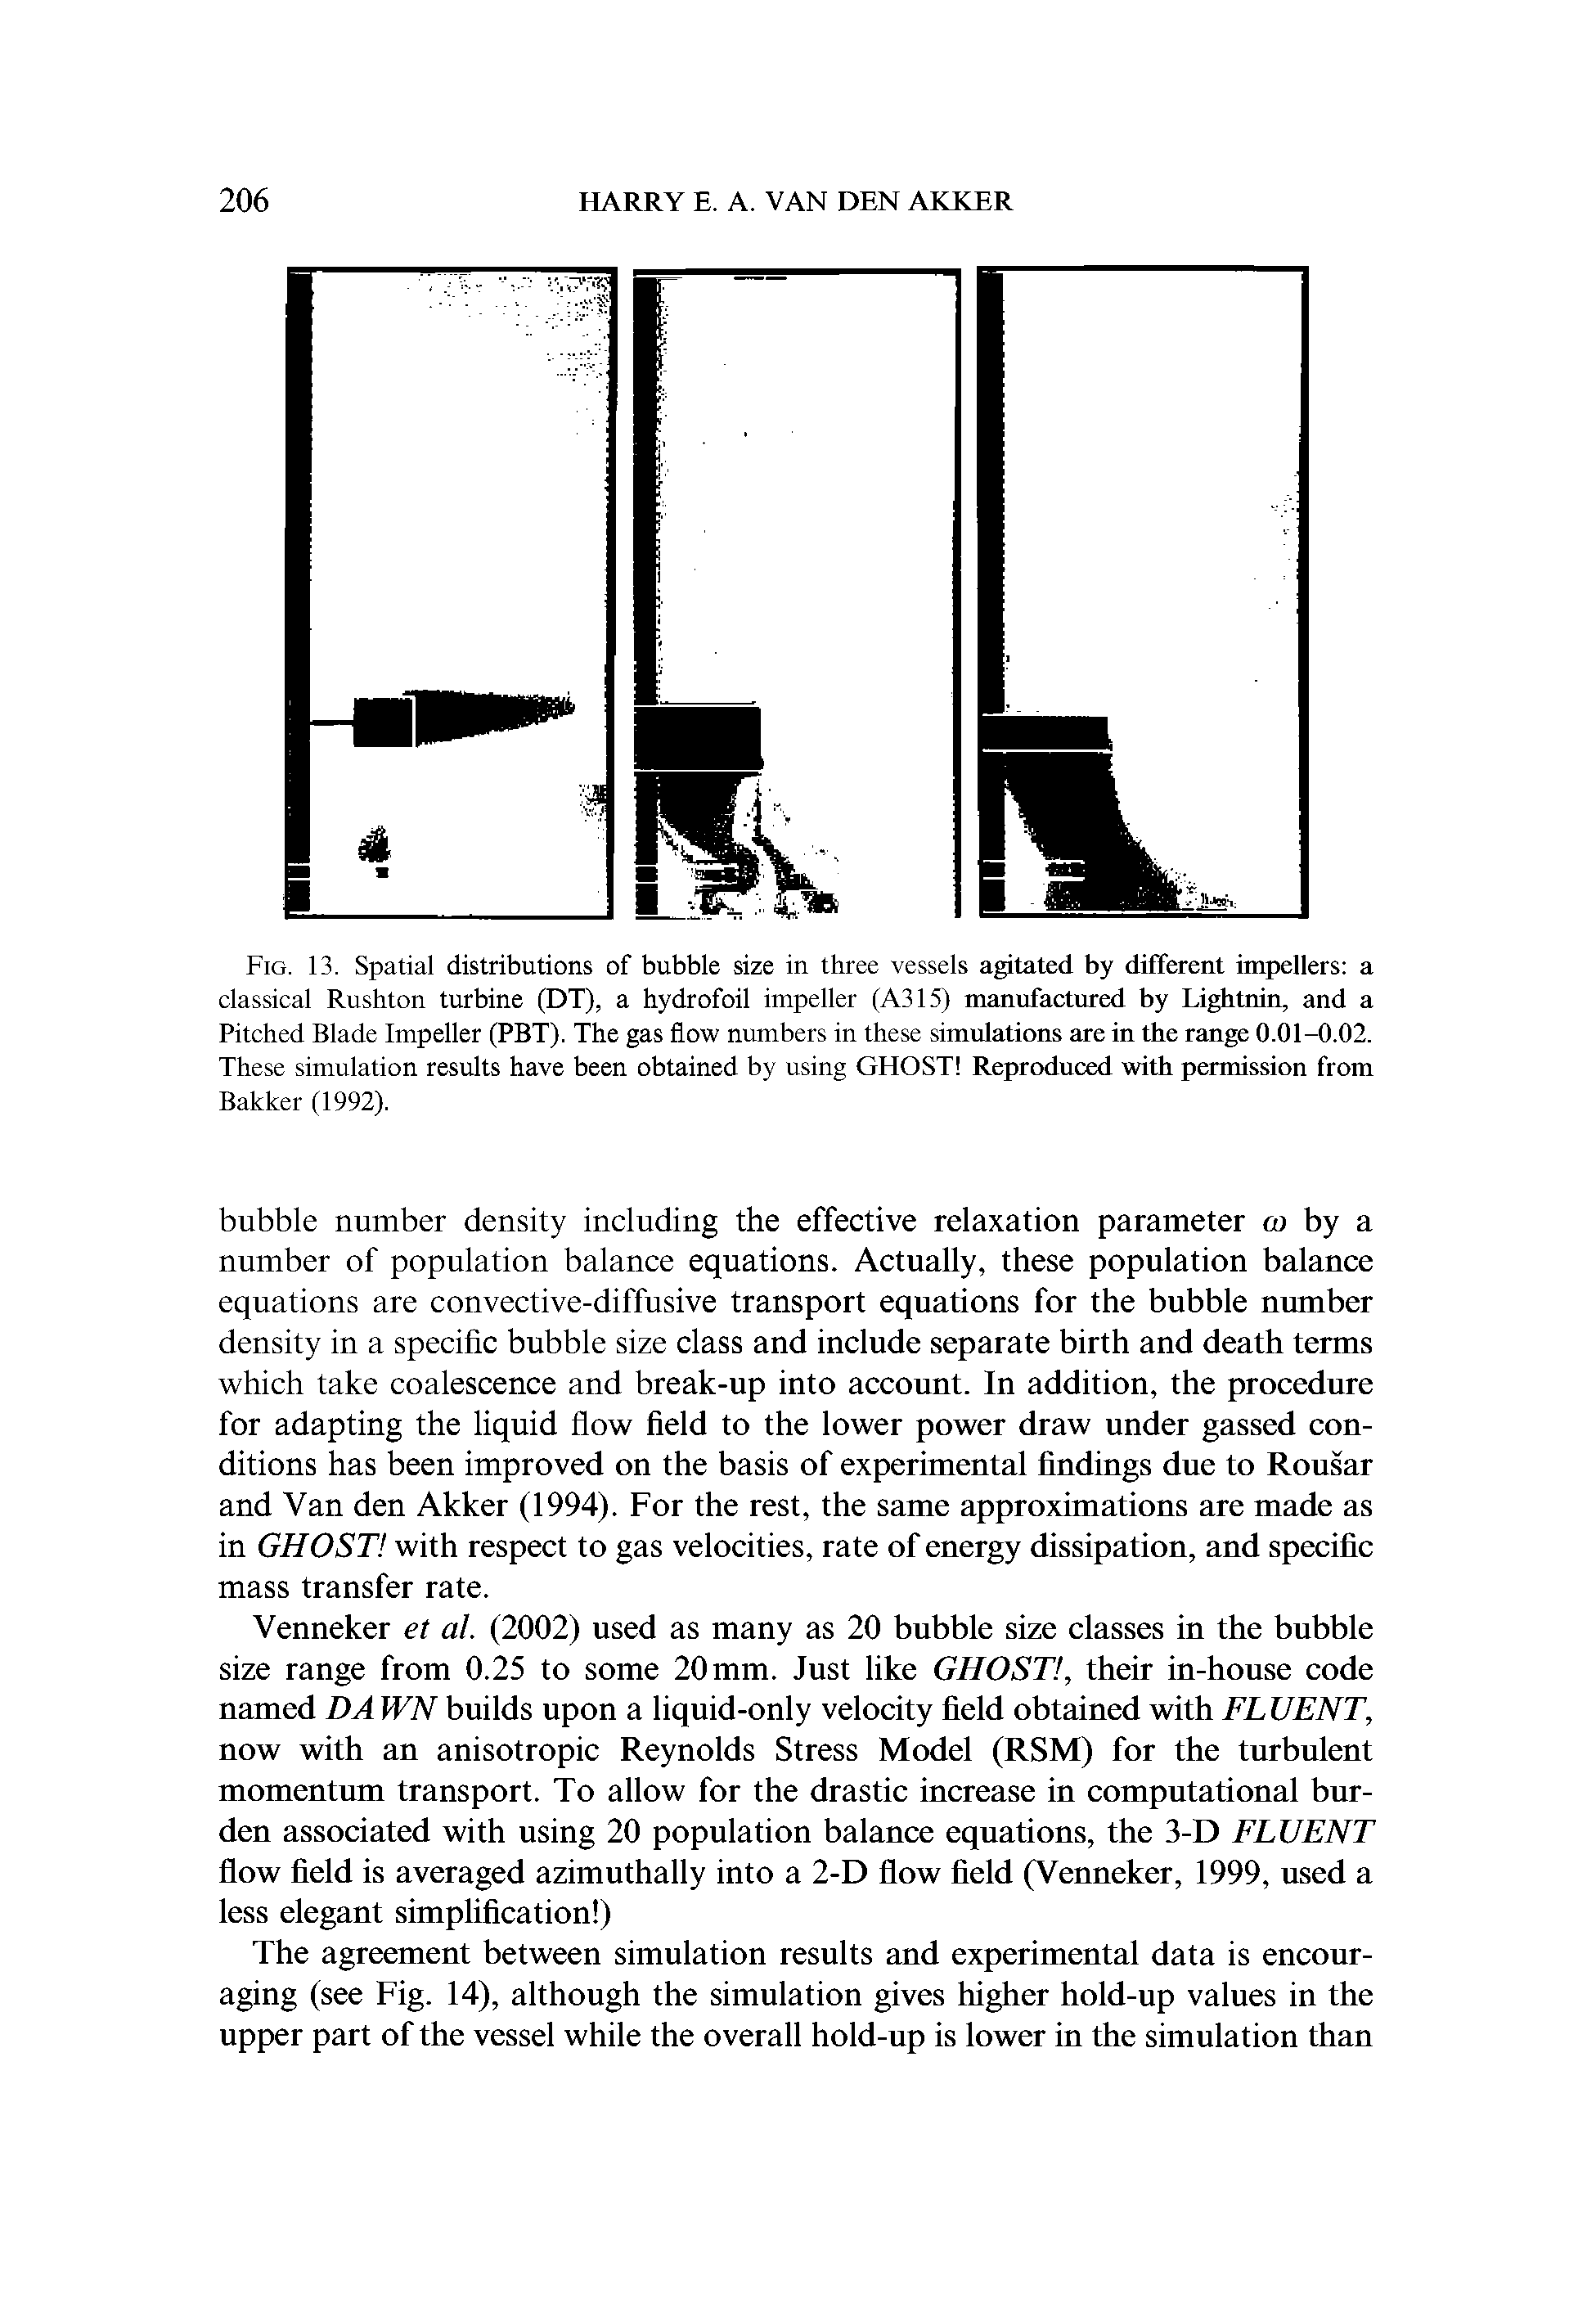 Fig. 13. Spatial distributions of bubble size in three vessels agitated by different impellers a classical Rushton turbine (DT), a hydrofoil impeller (A315) manufactured by Lightnin, and a Pitched Blade Impeller (PBT). The gas flow numbers in these simulations are in the range 0.01-0.02. These simulation results have been obtained by using GHOST Reproduced with permission from Bakker (1992).